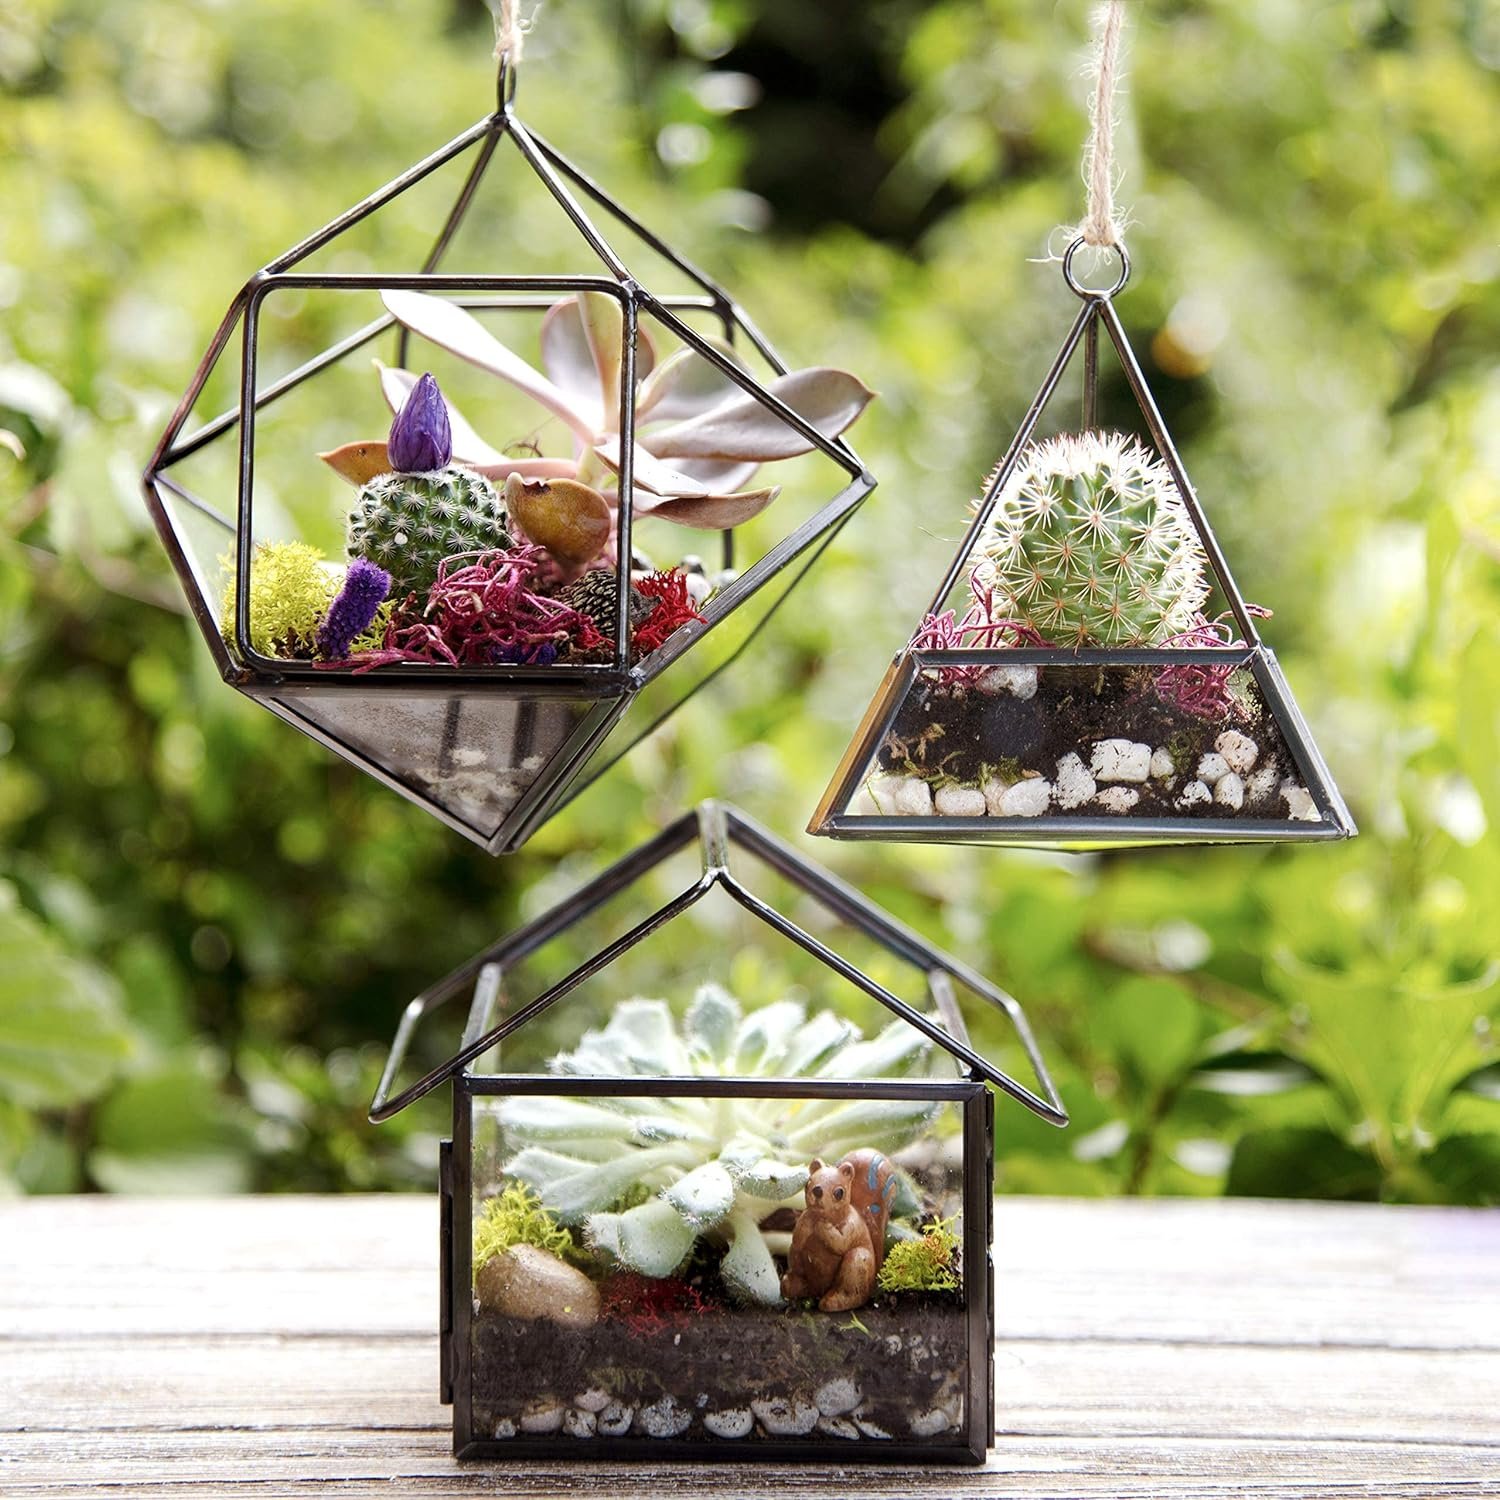 DEco Glass Geometric Plant Terrarium Set of 3 - Indoor Tabletop  Hanging Brass Triangle, House  Prism Planters - Succulents, Air Plants, Moss - Home Garden Office Decor - Gift Set (Terrariums Only)